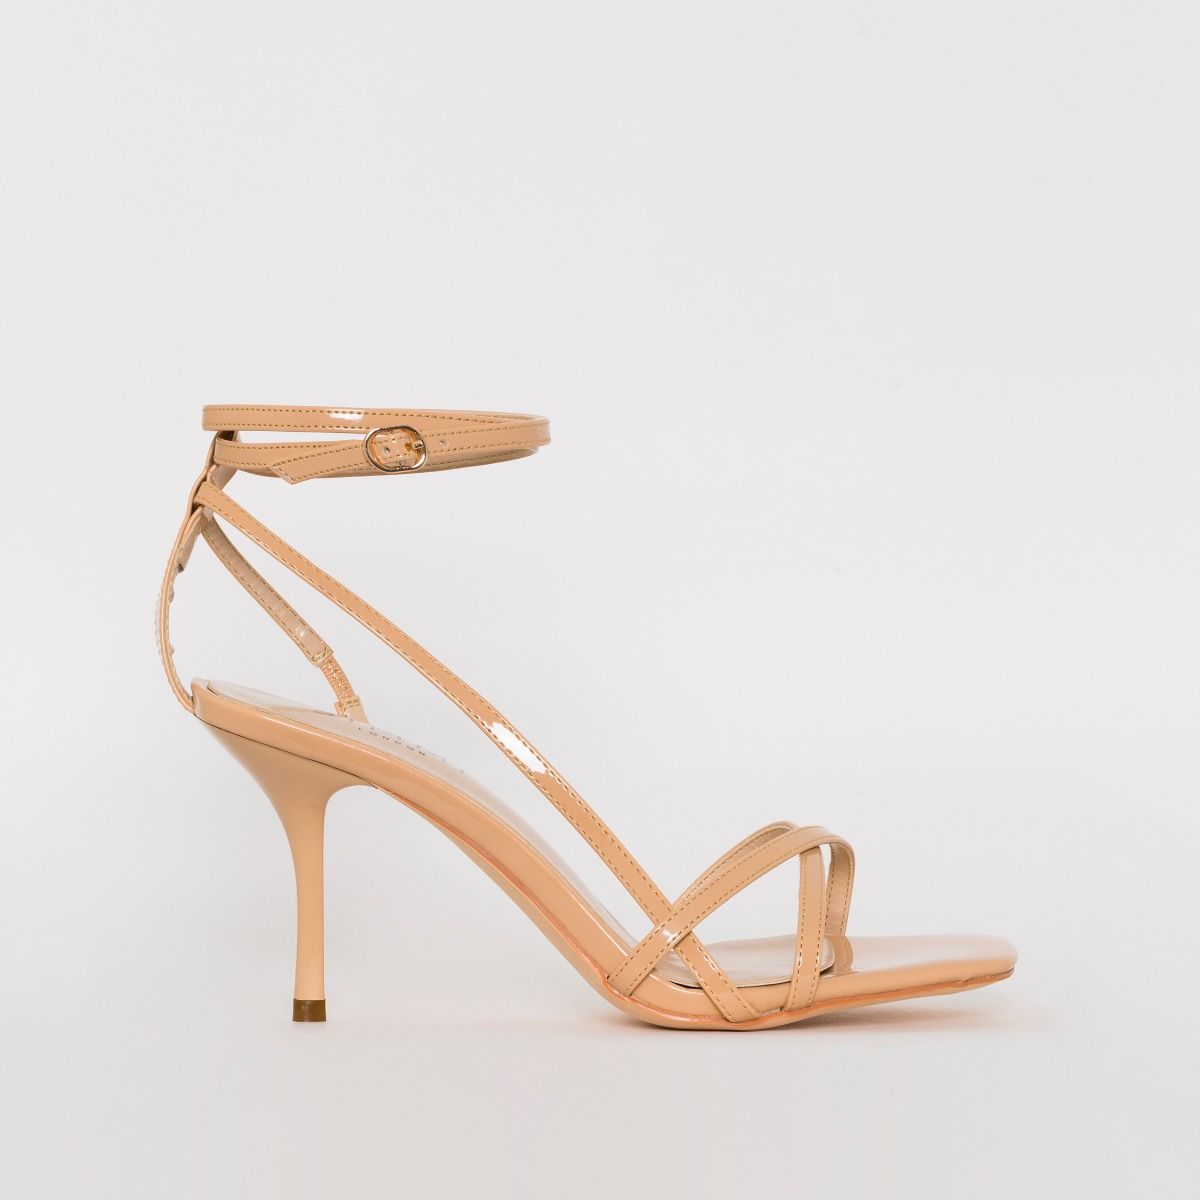 nude patent strappy heels